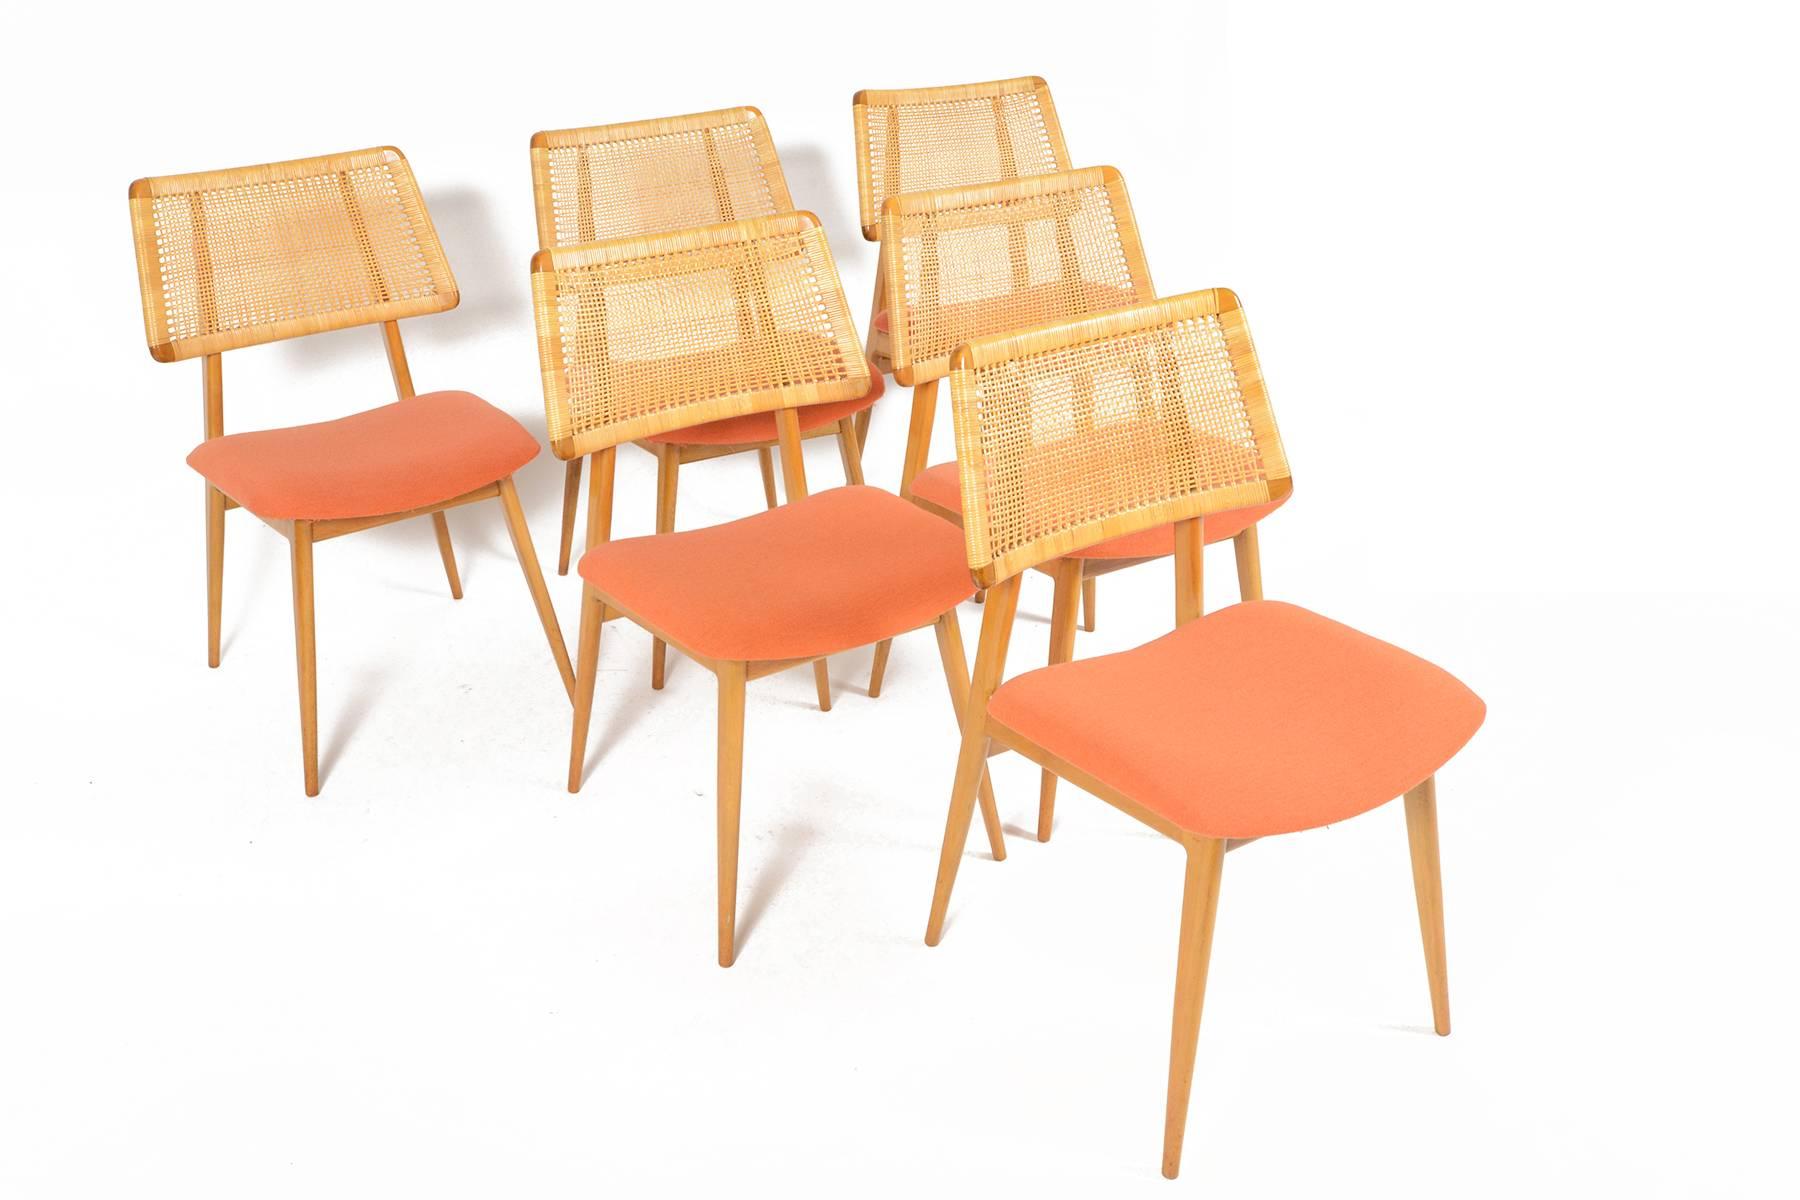 This set of six mid century beech dining chairs was designed and manufactured by Habeo of Germany in the 1960s. This stunning modern design features original rattan backrests. Seat bottoms wear their original coral wool upholstery. Frames are in